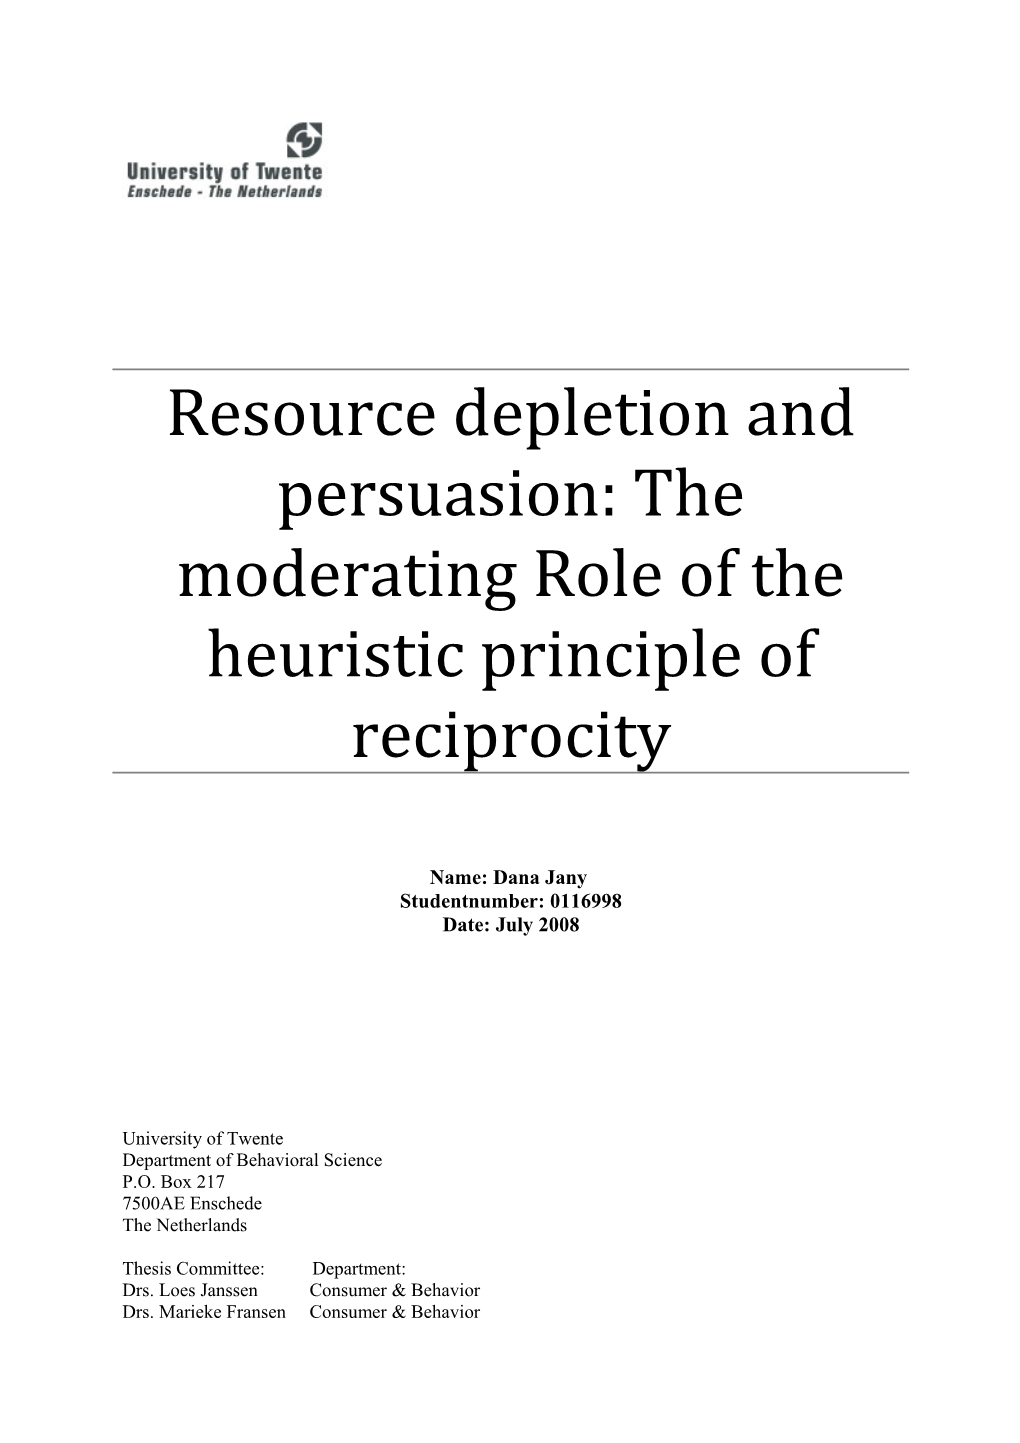 Resource Depletion and Persuasion :The Moderating Role of the Heuristic Principle of Reciprocity